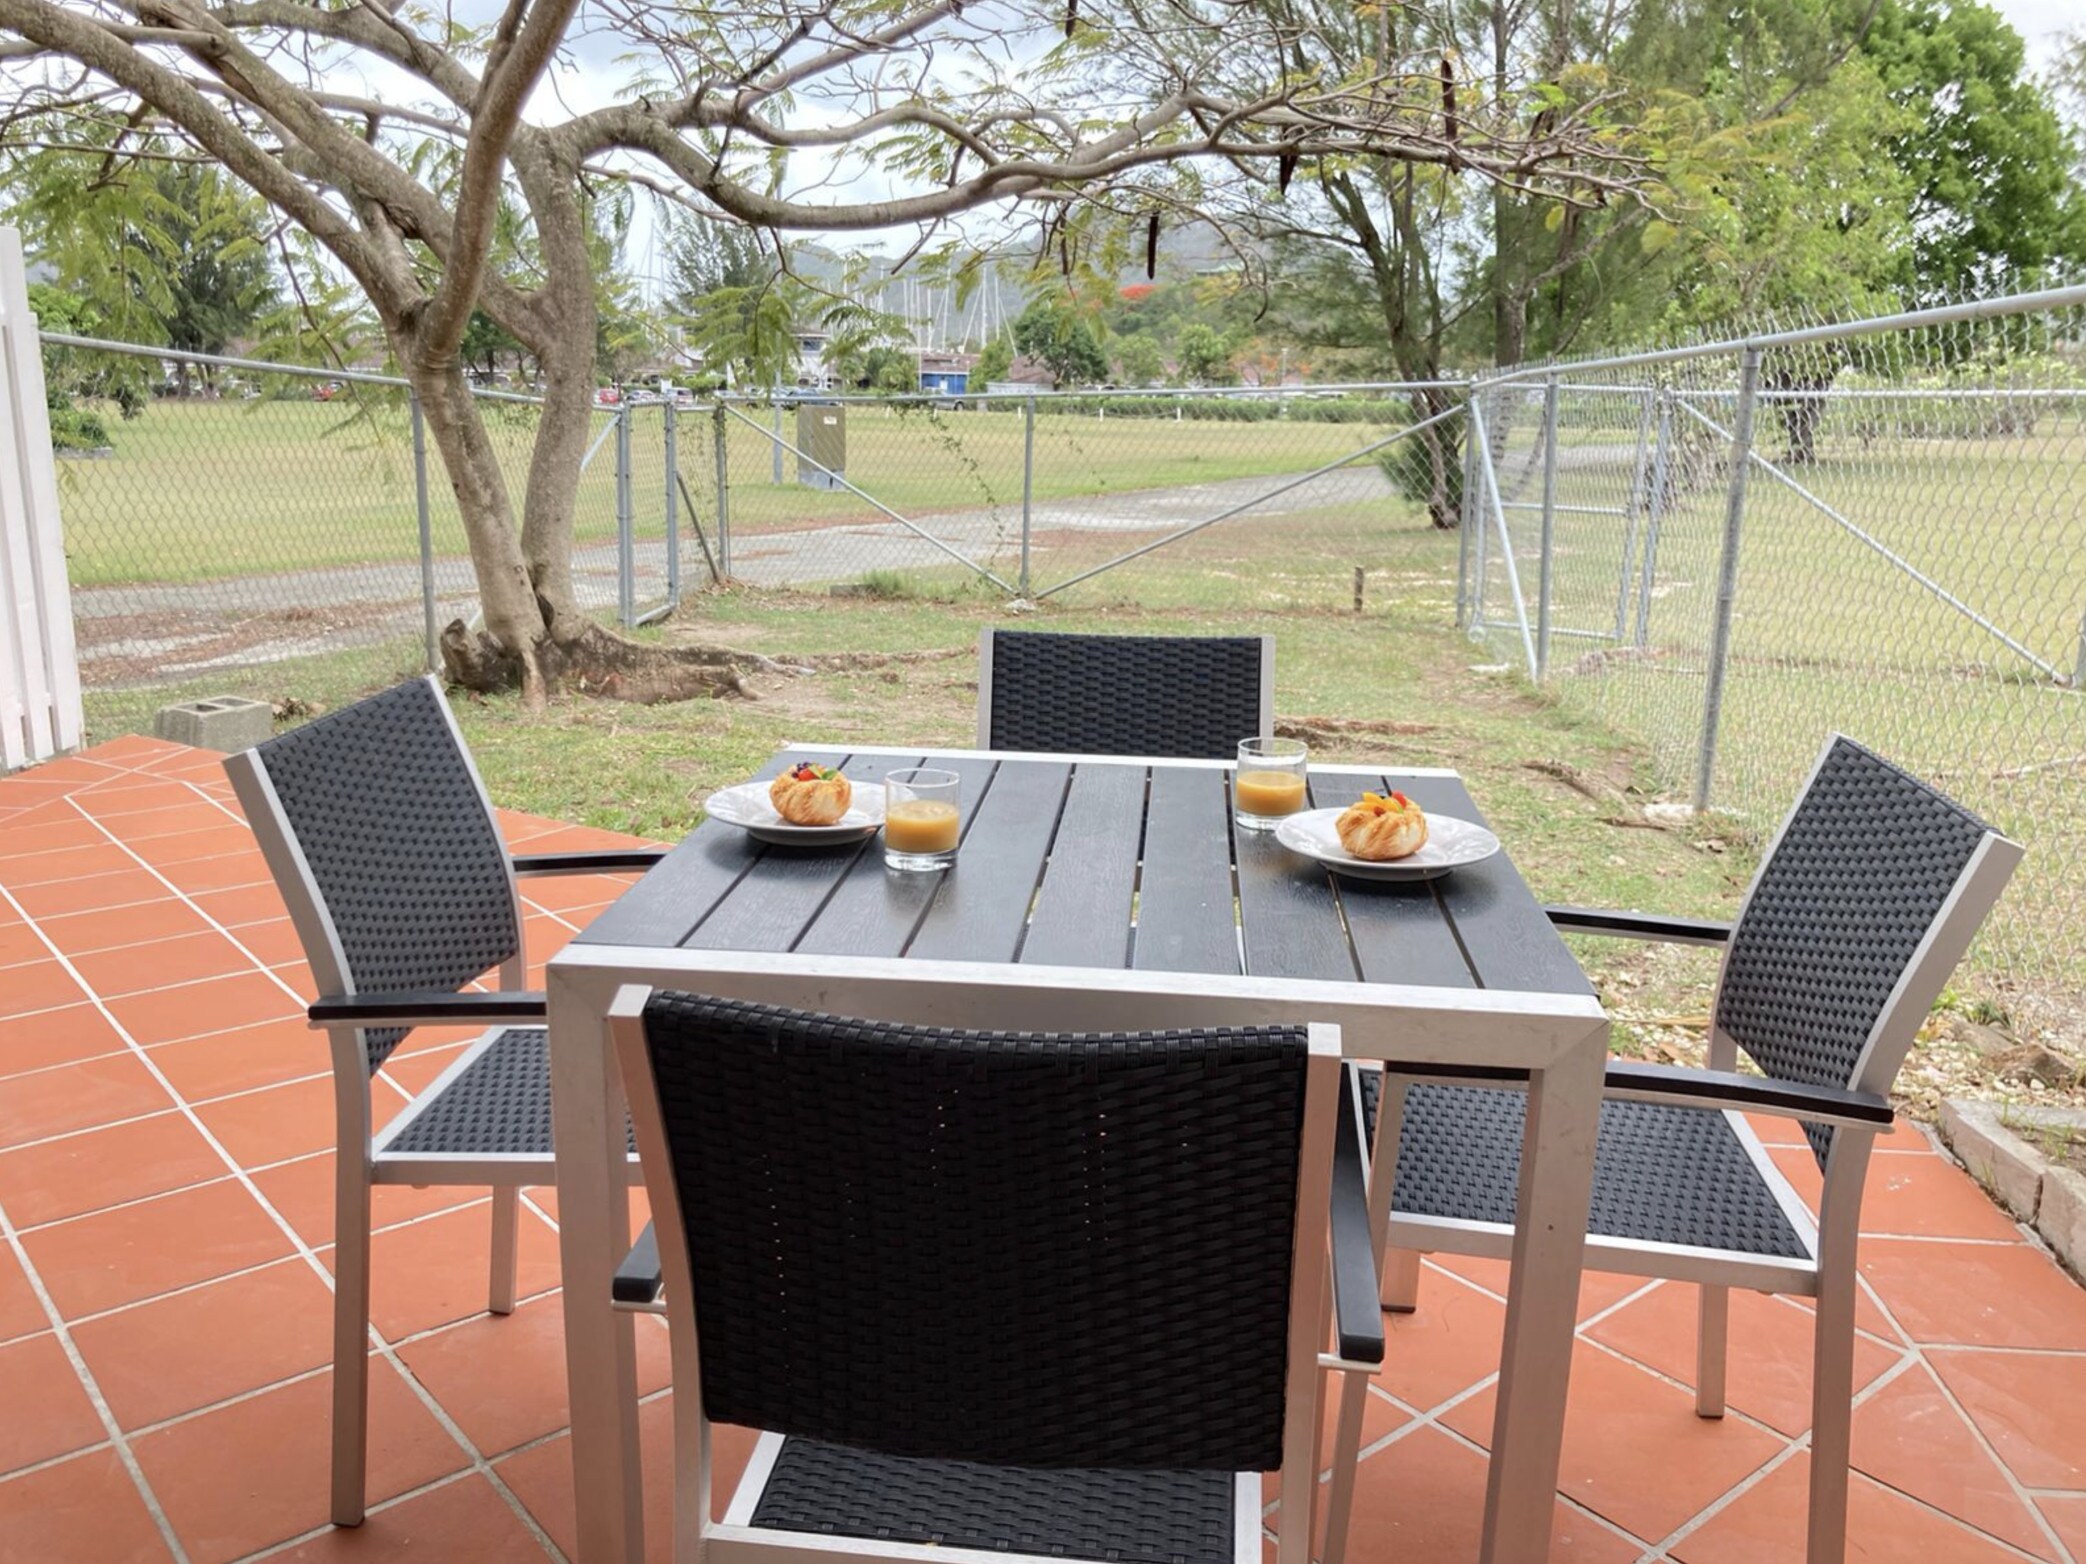 Newly renovated, beautiful two-bedroom garden view villa beautifully decorated with comfortable furnishings at Jolly Harbour Villa rentals